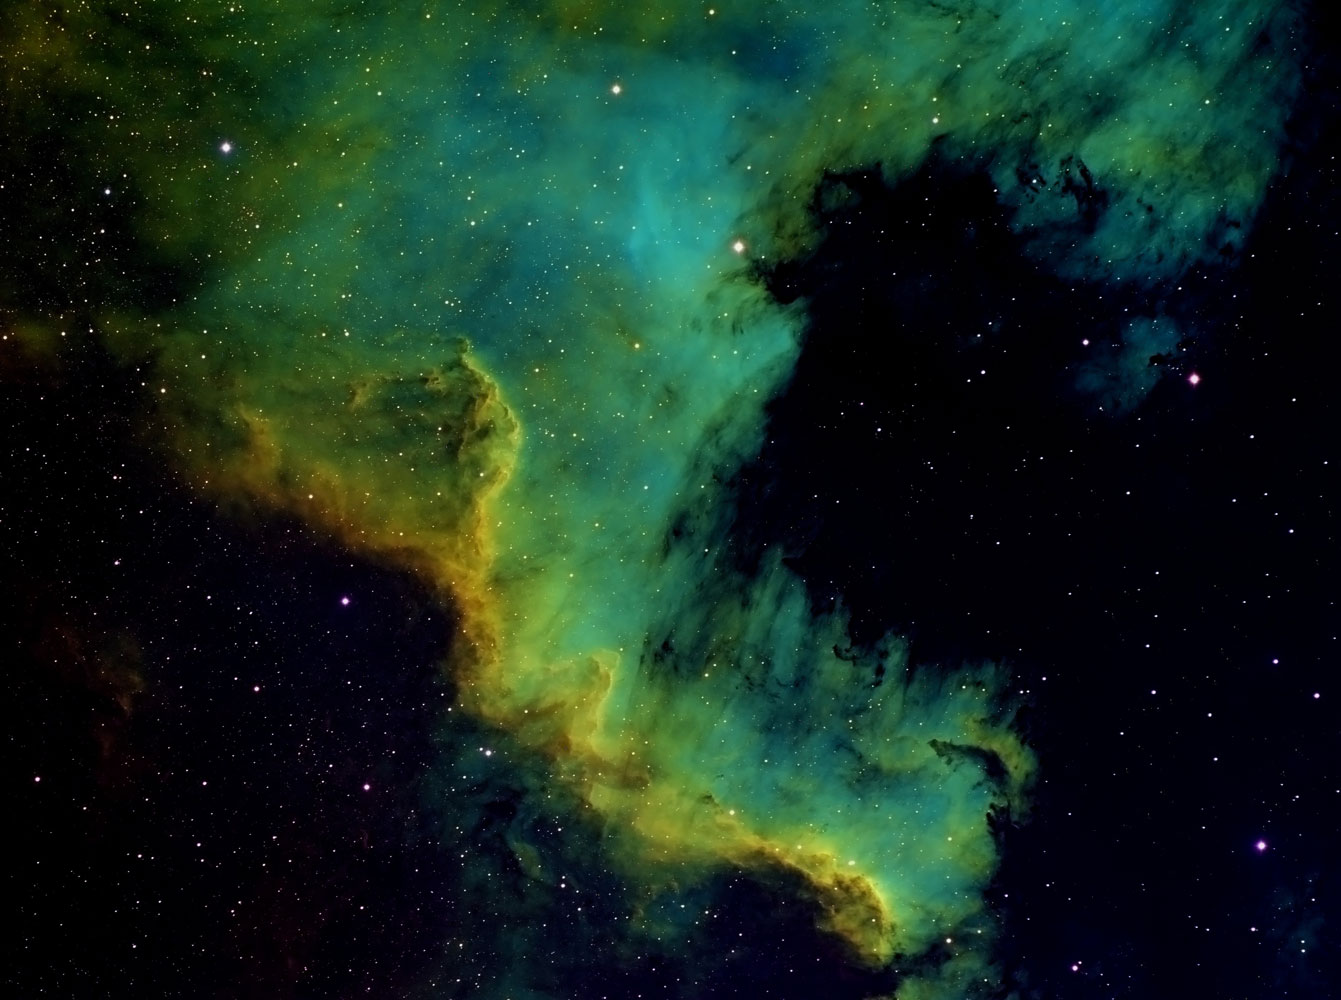 NGC 7000, also known as the North America Nebula - The Gulf of Mexico region, in the Cygnus Constellation, captured on May 21, 2014.